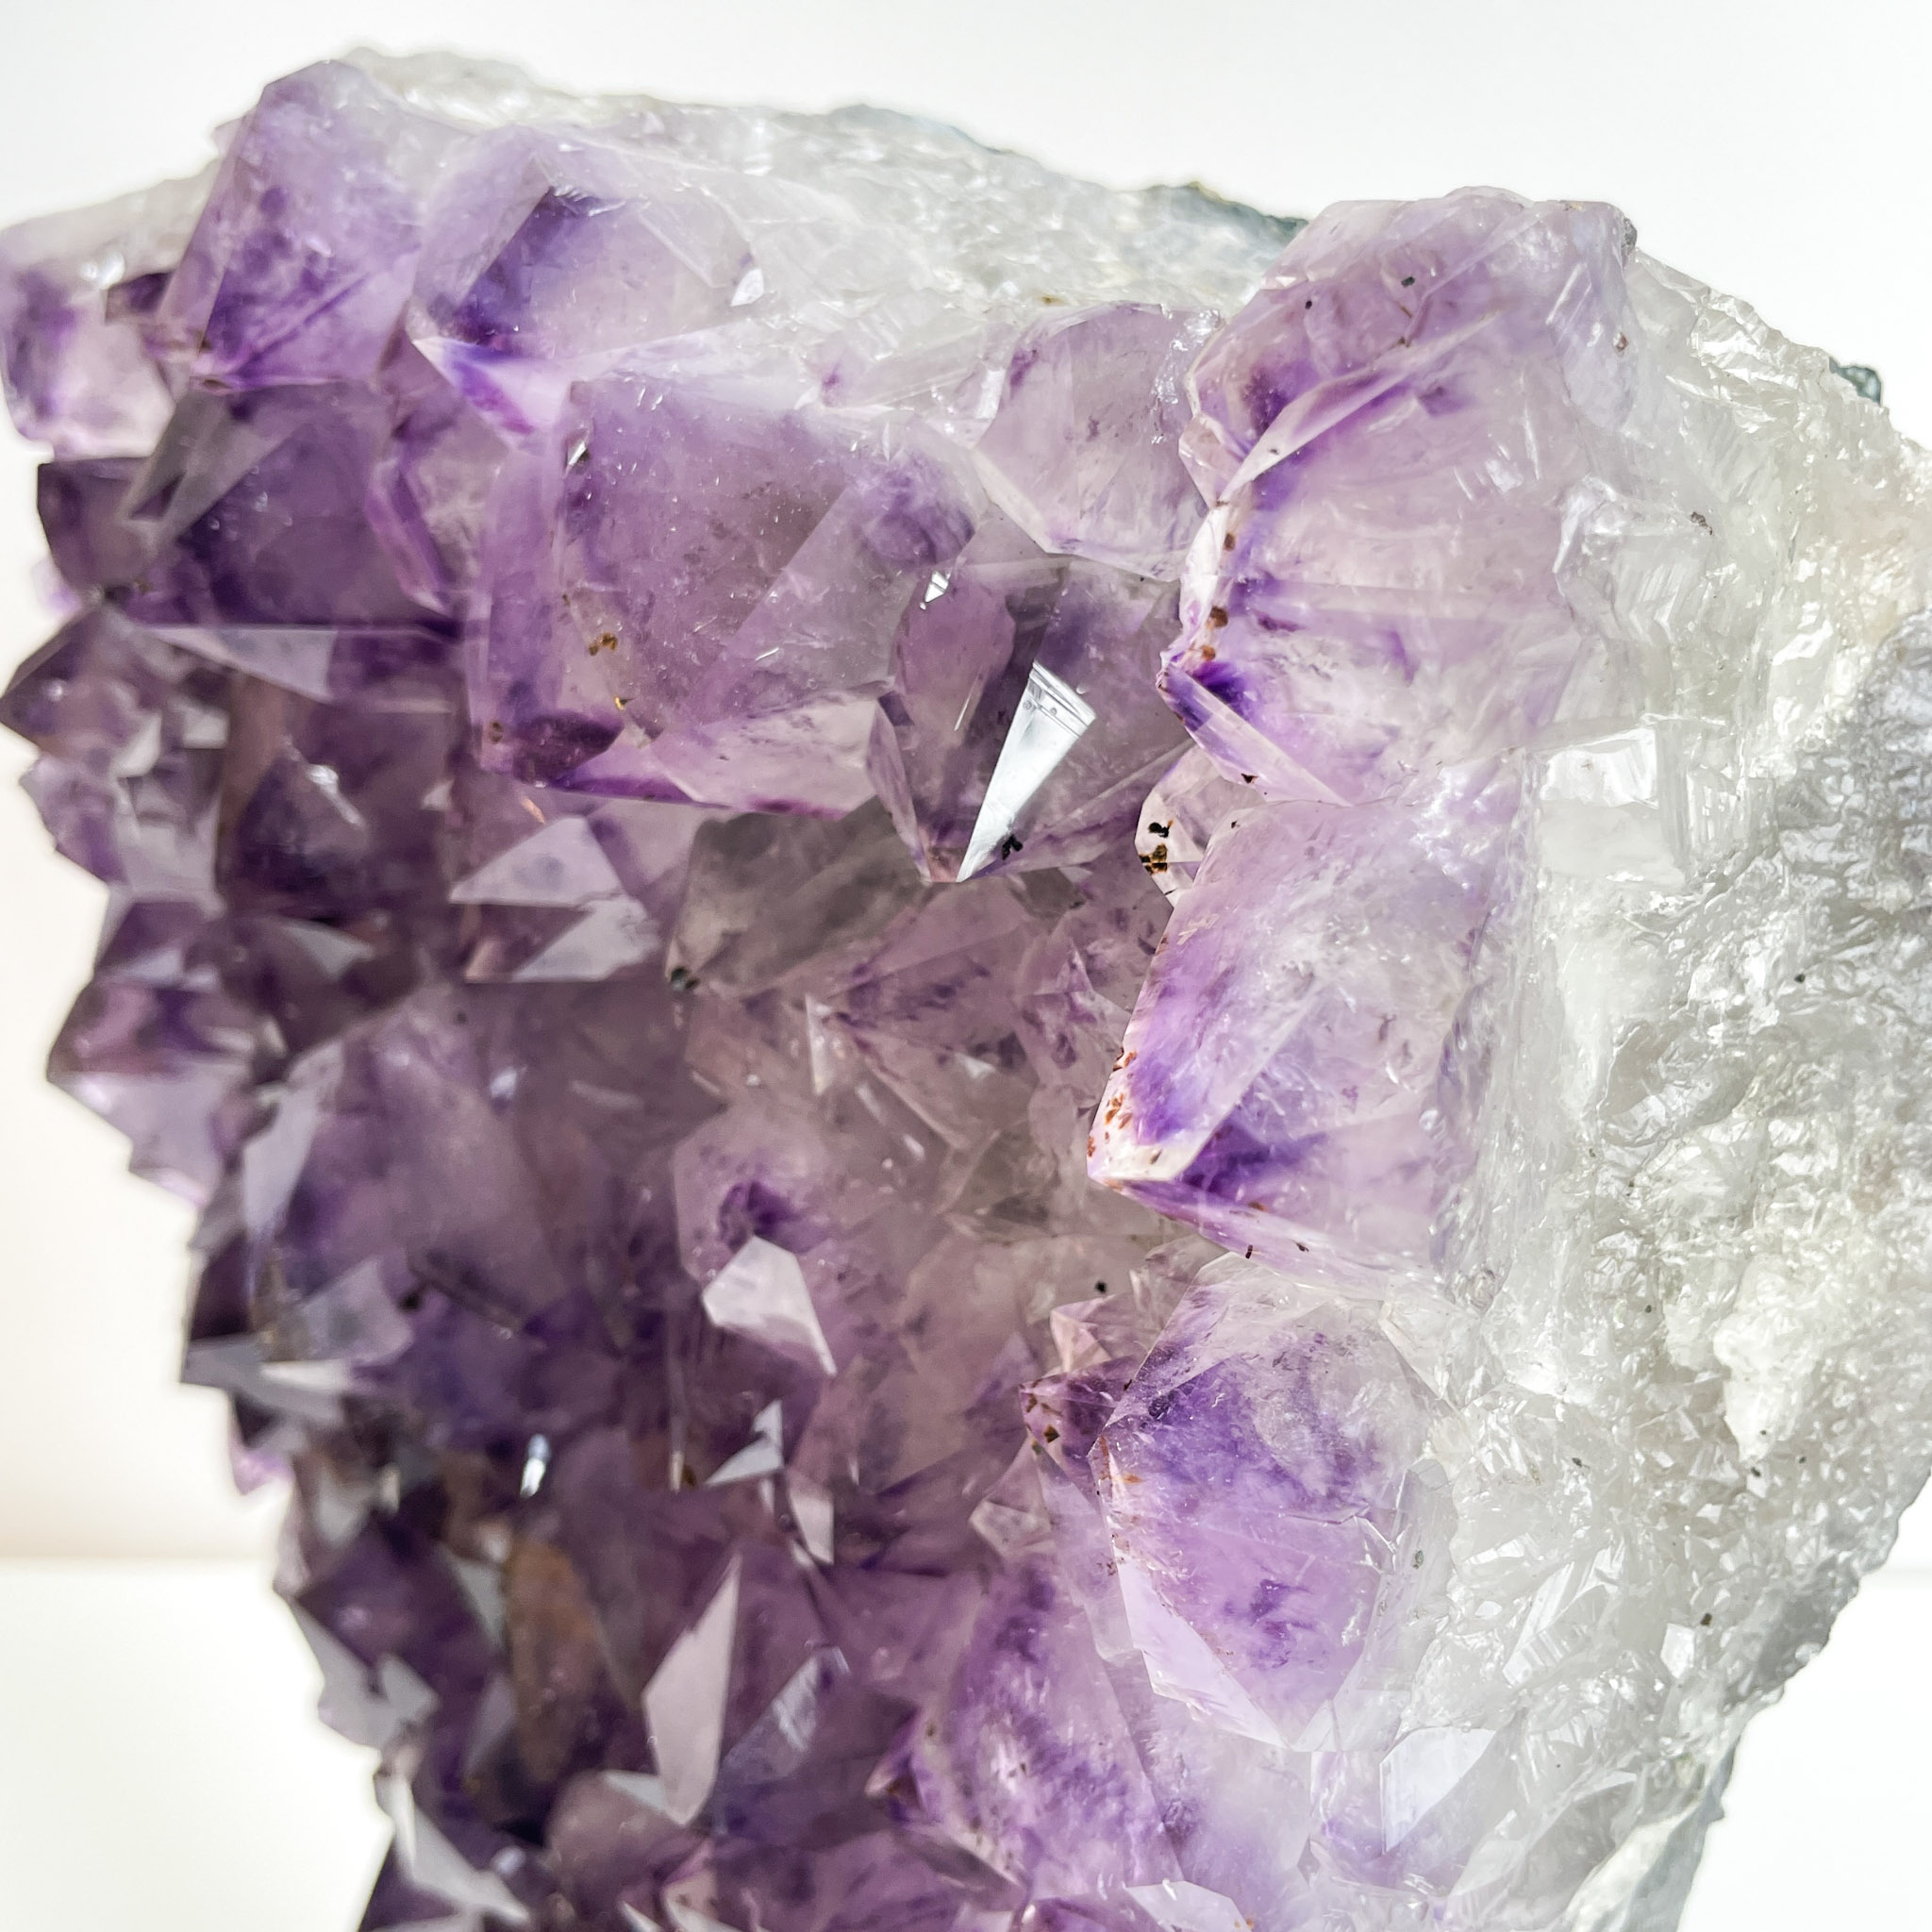 Close-up of an amethyst crystal cluster with well-defined purple crystals against a white background.